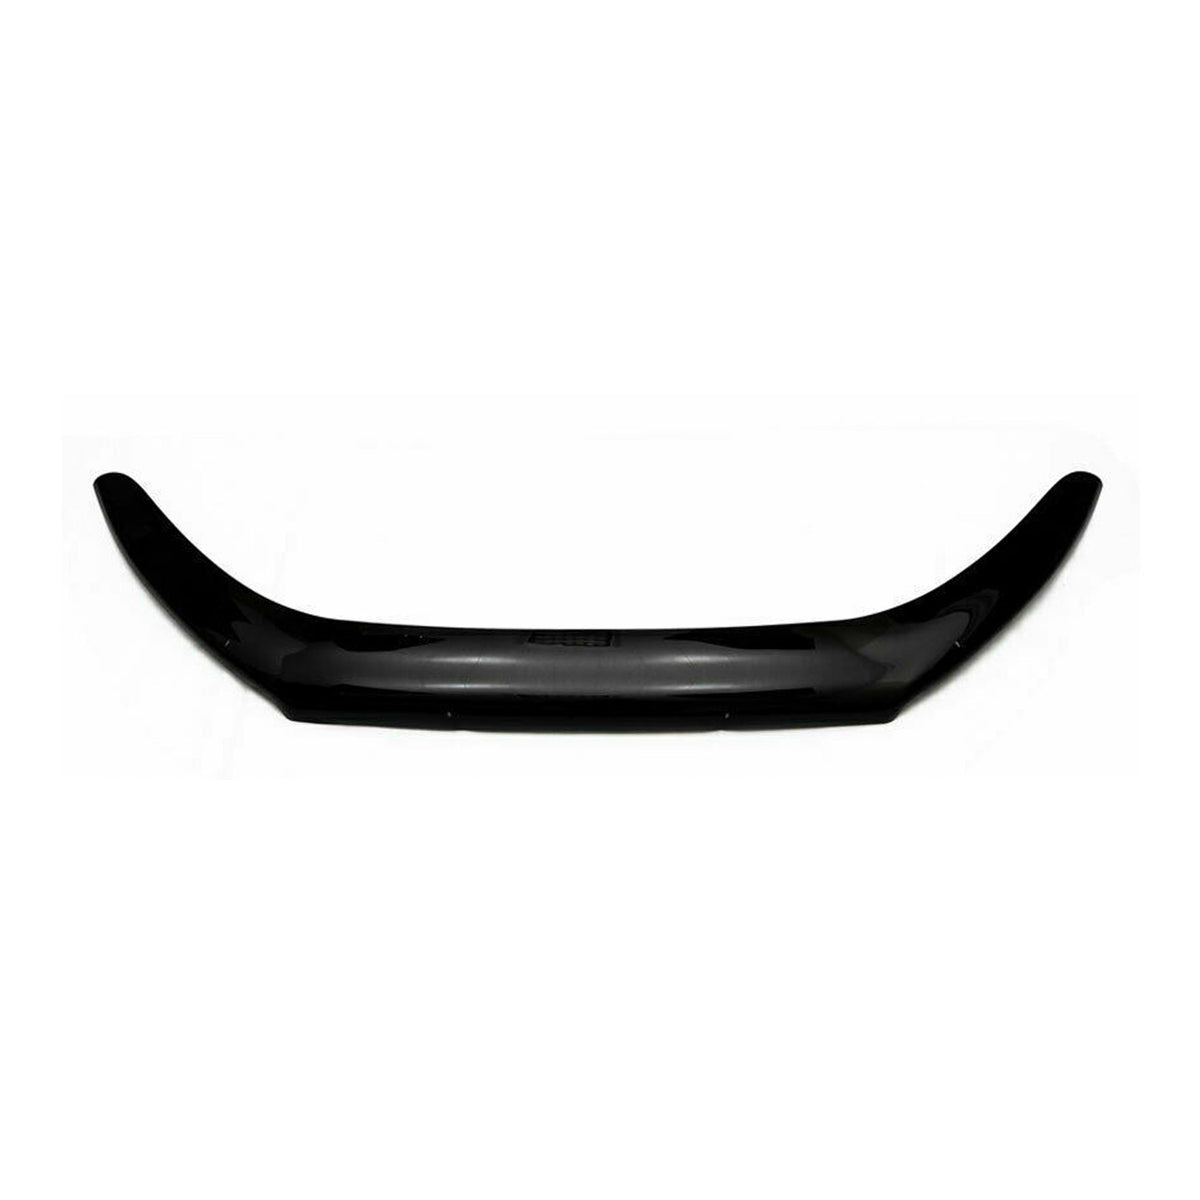 Bonnet deflector insect protection for Hyundai Tucson 2015-2021 Dark